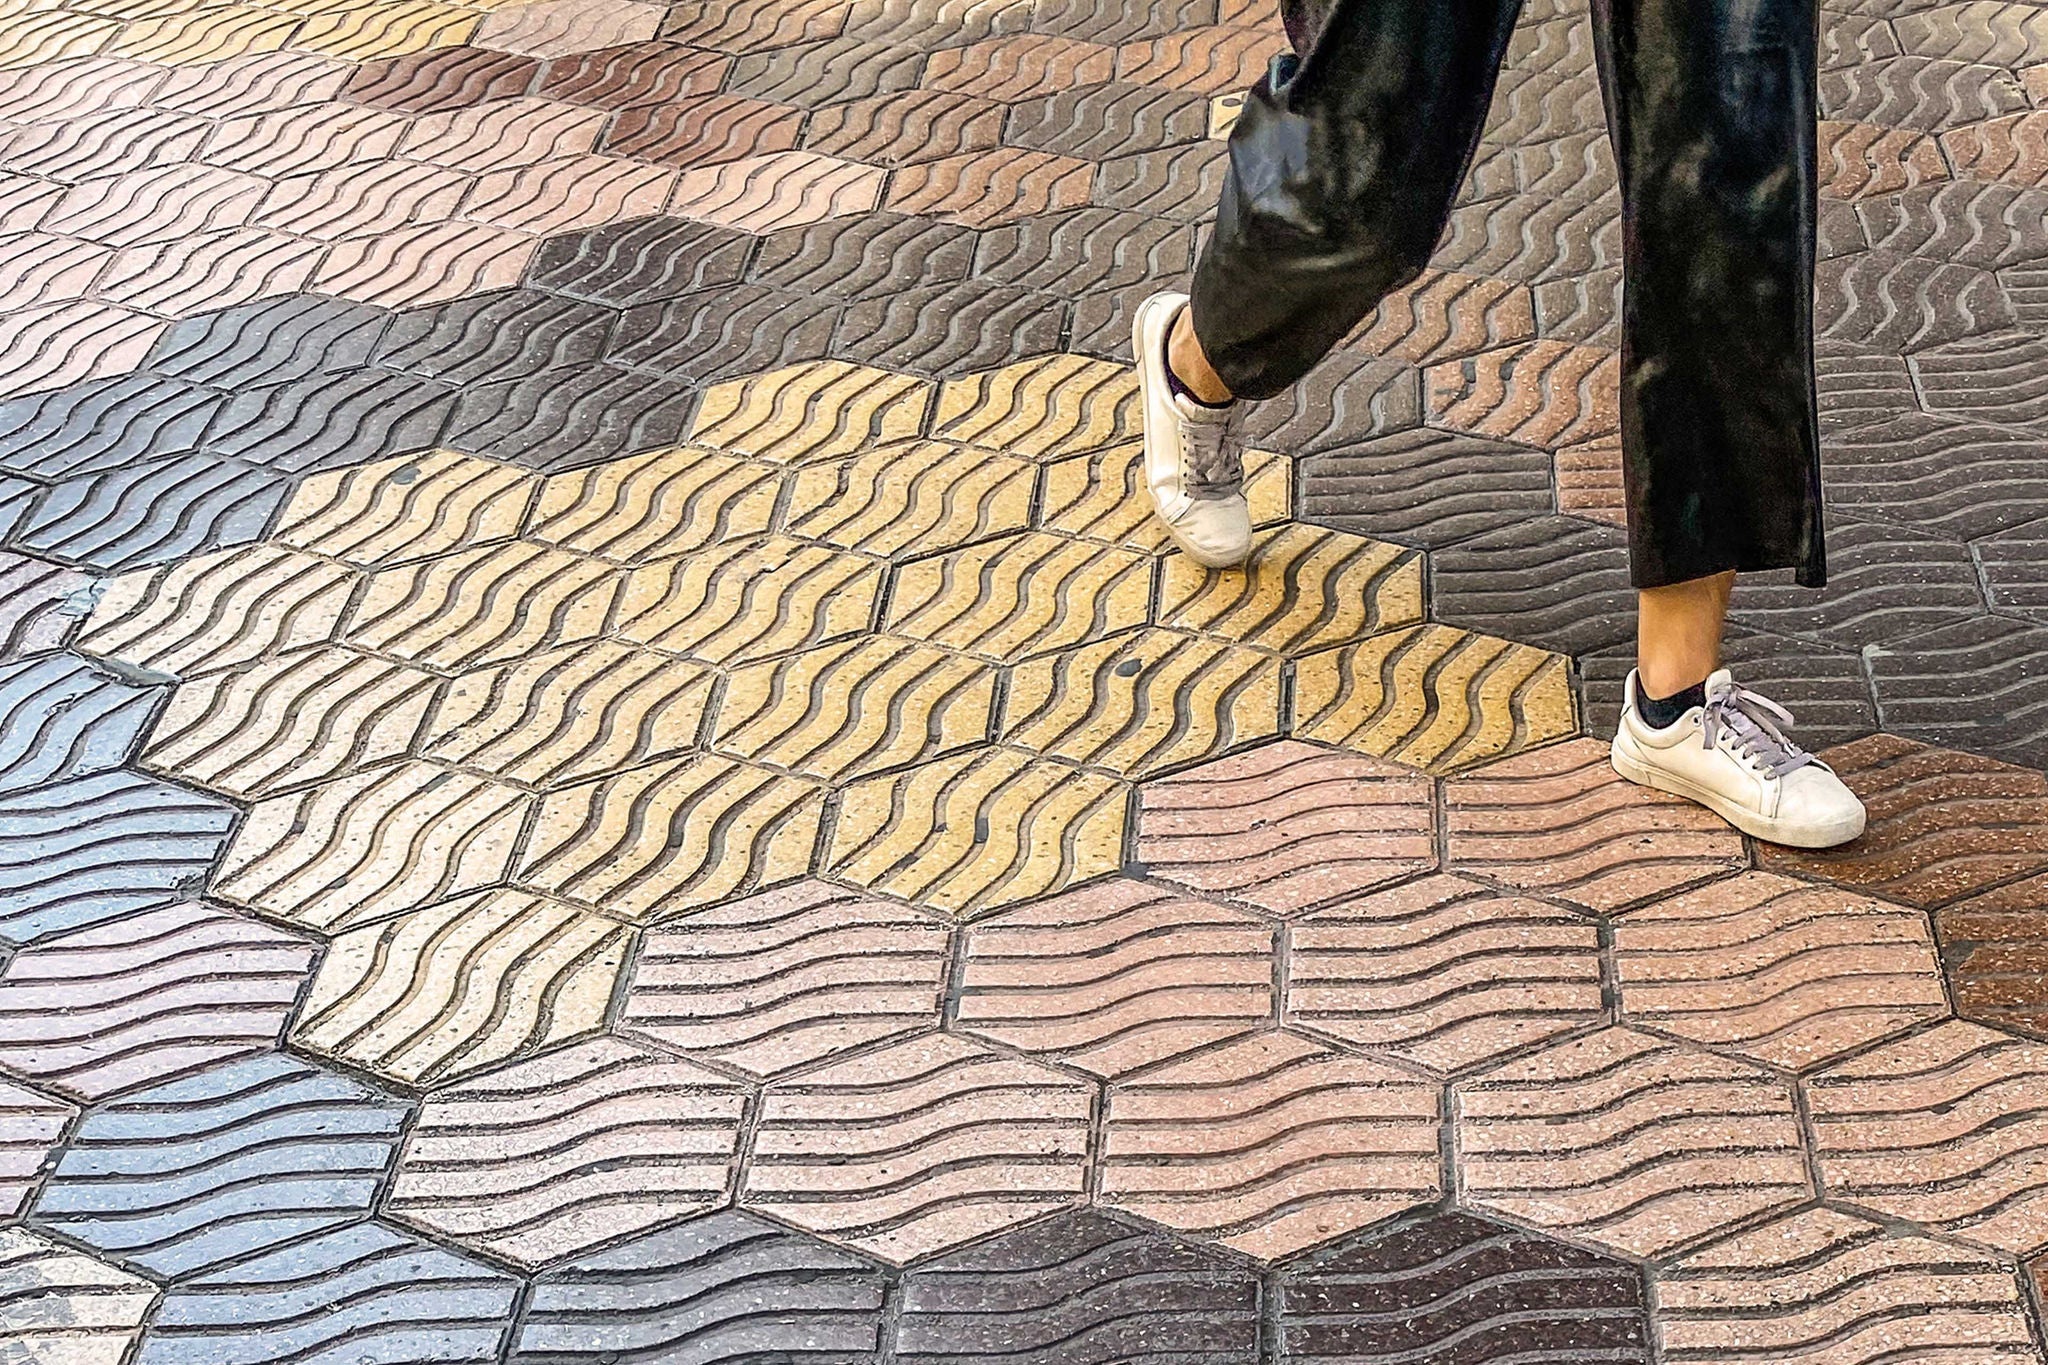 Woman walking over hexagonal tiled floor in the streets of Valencia, Spain